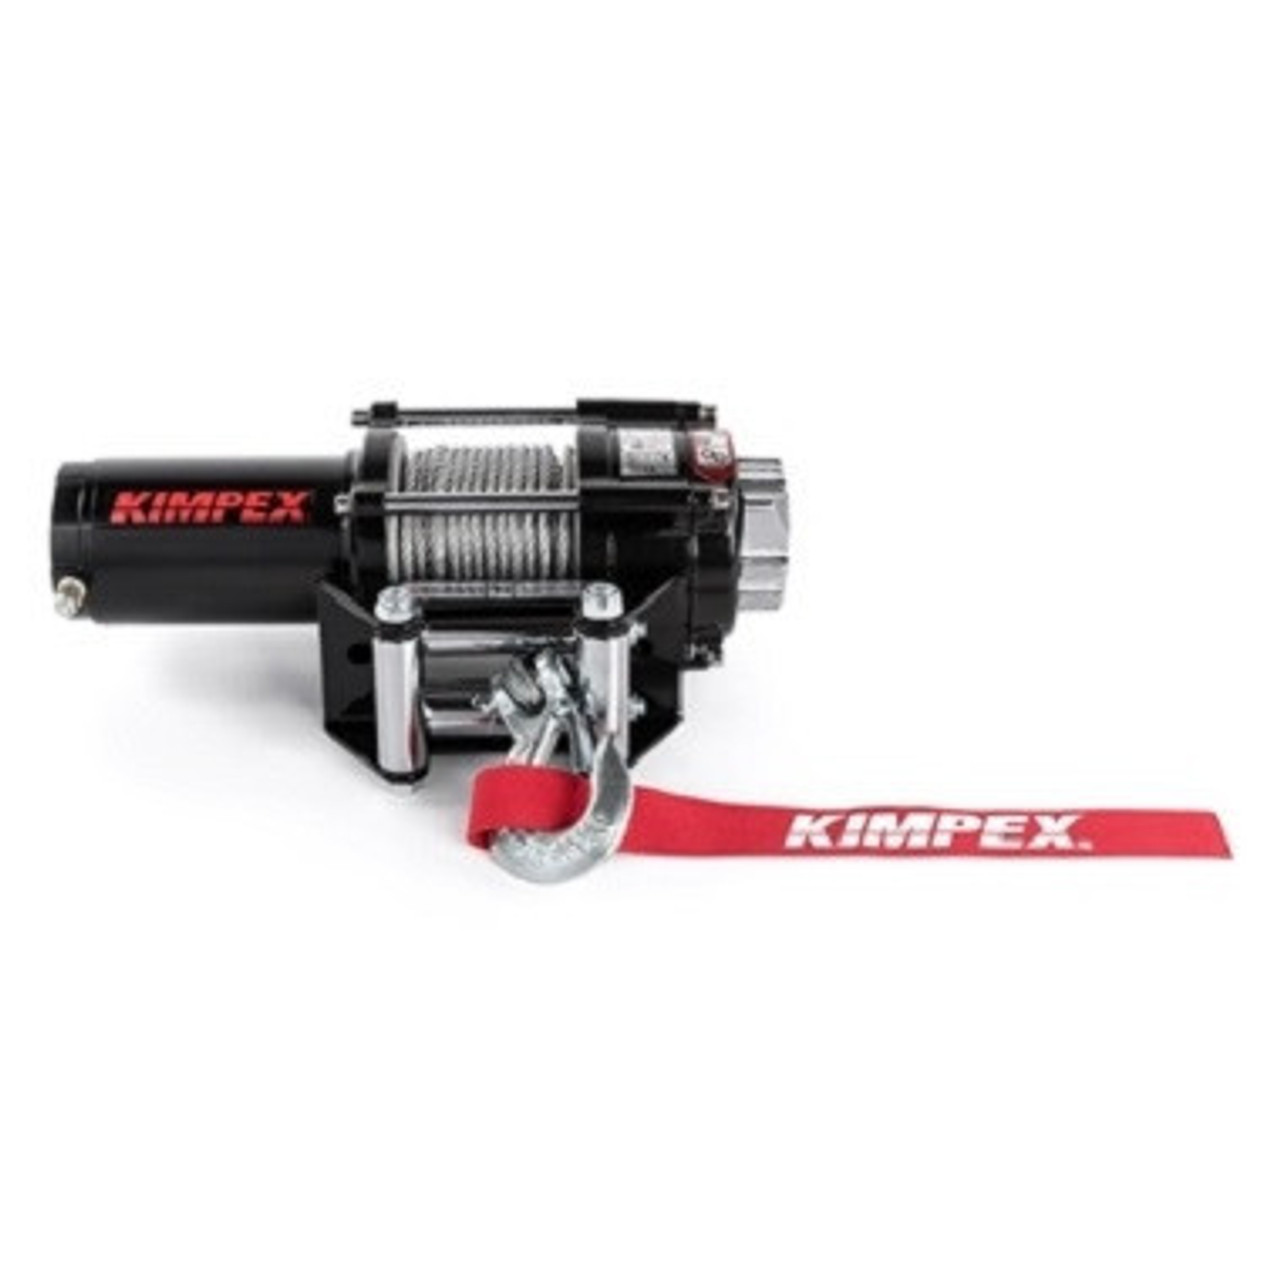 Arctic Cat Prowler / Wildcat 3500 LBS Winch IP 67 Kit by Kimpex